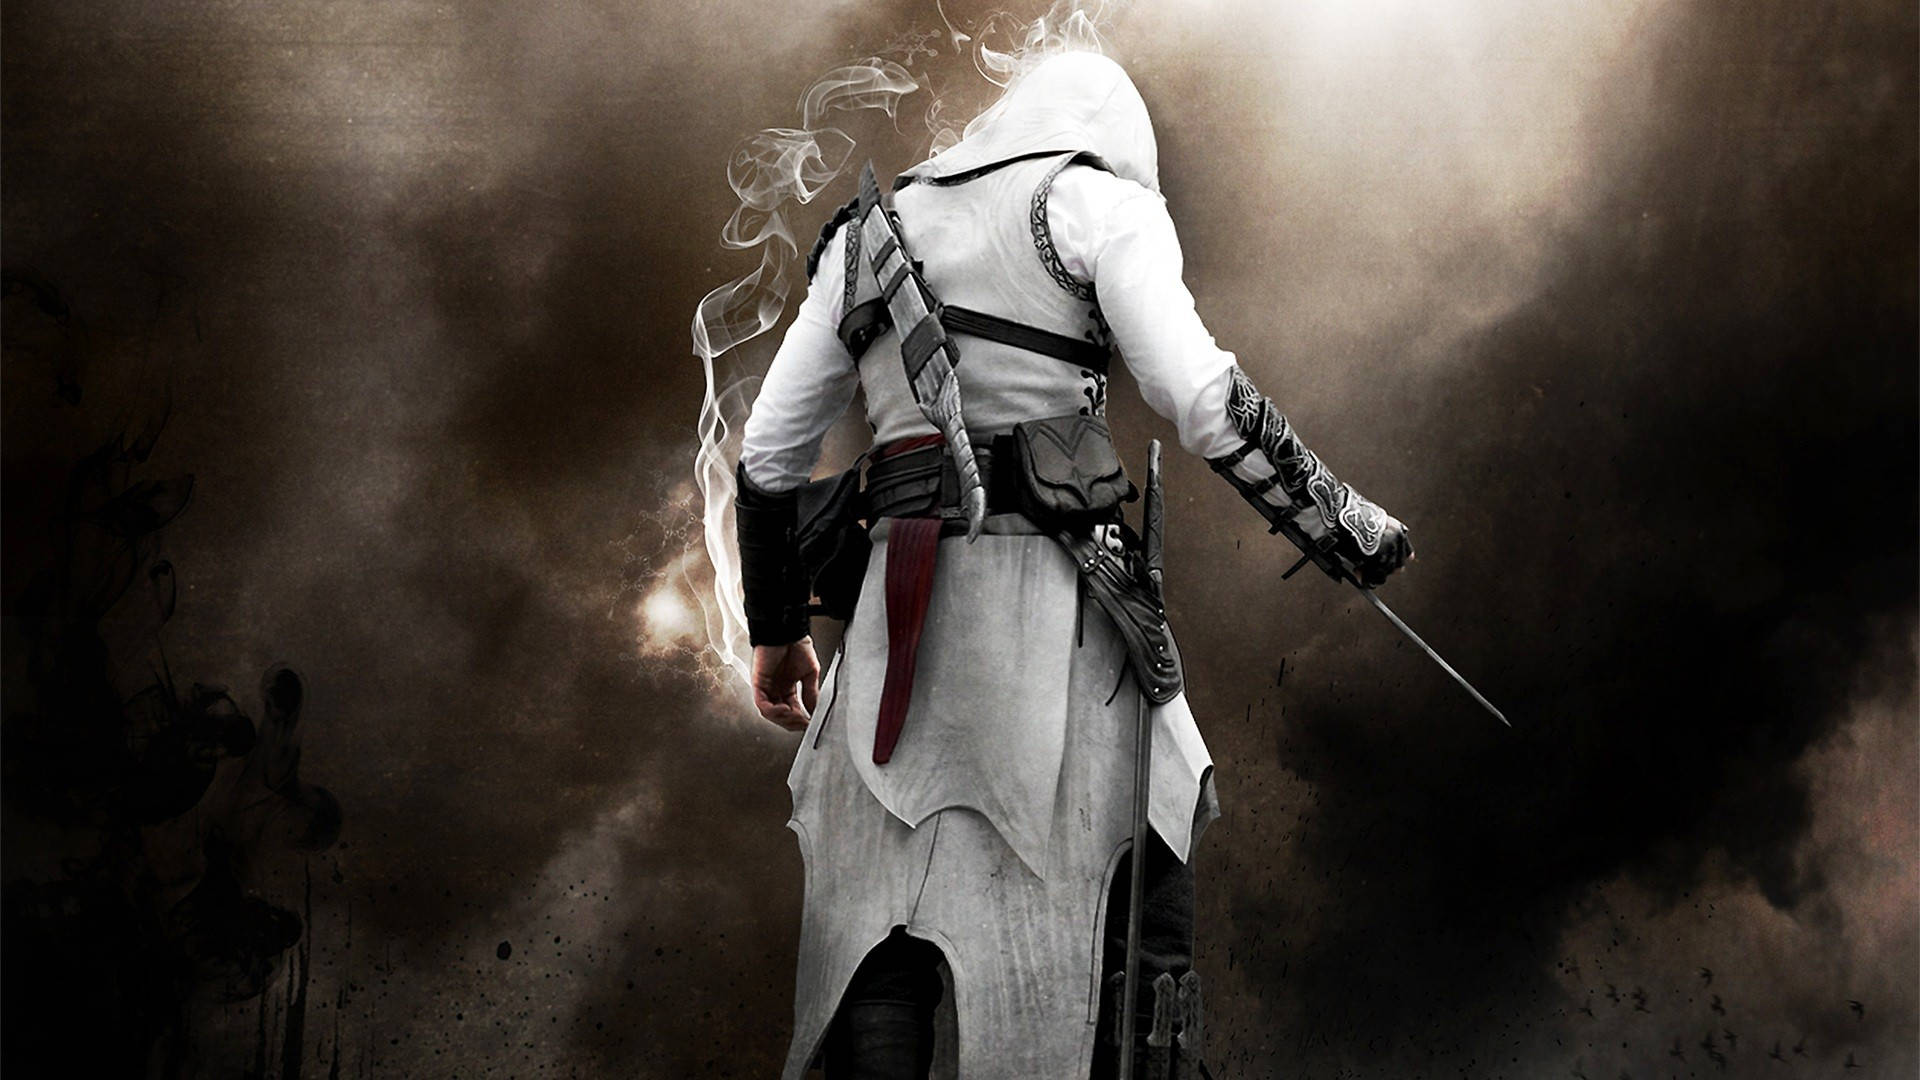 Download Assassin's Creed Animus Wallpaper 